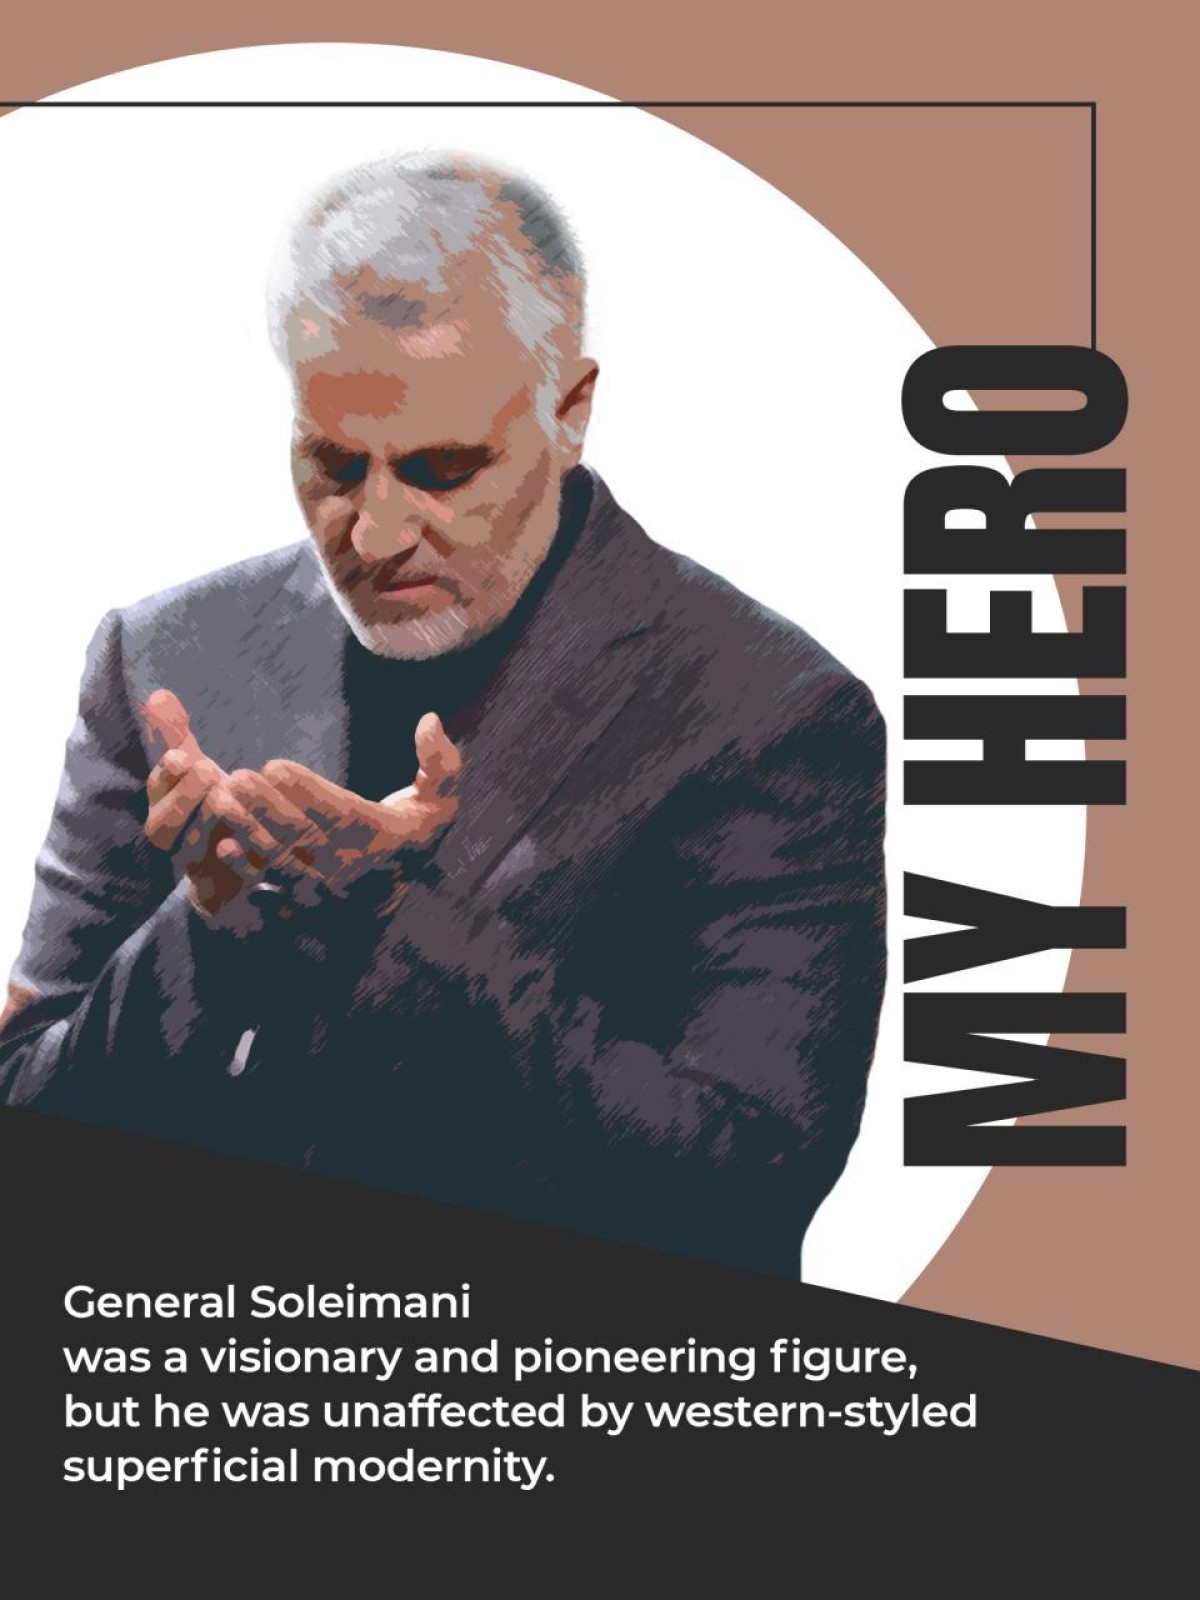 General Soleimani was a visionary and pioneering figure